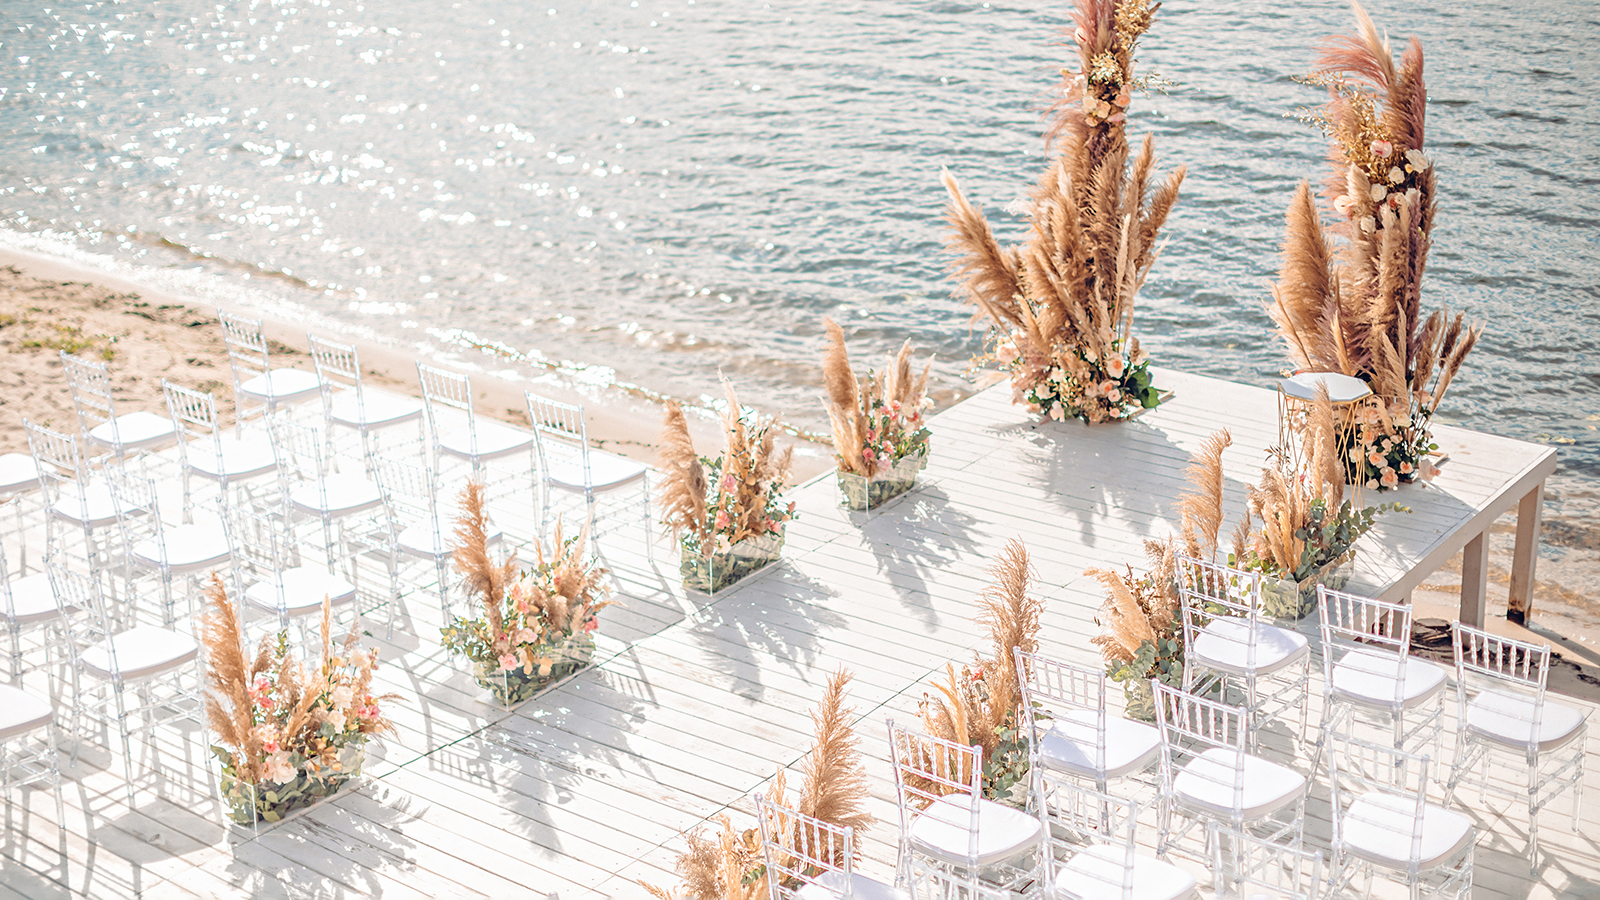 Wedding by the river. Beach wedding venue. Wooden stage with floral decorations arch